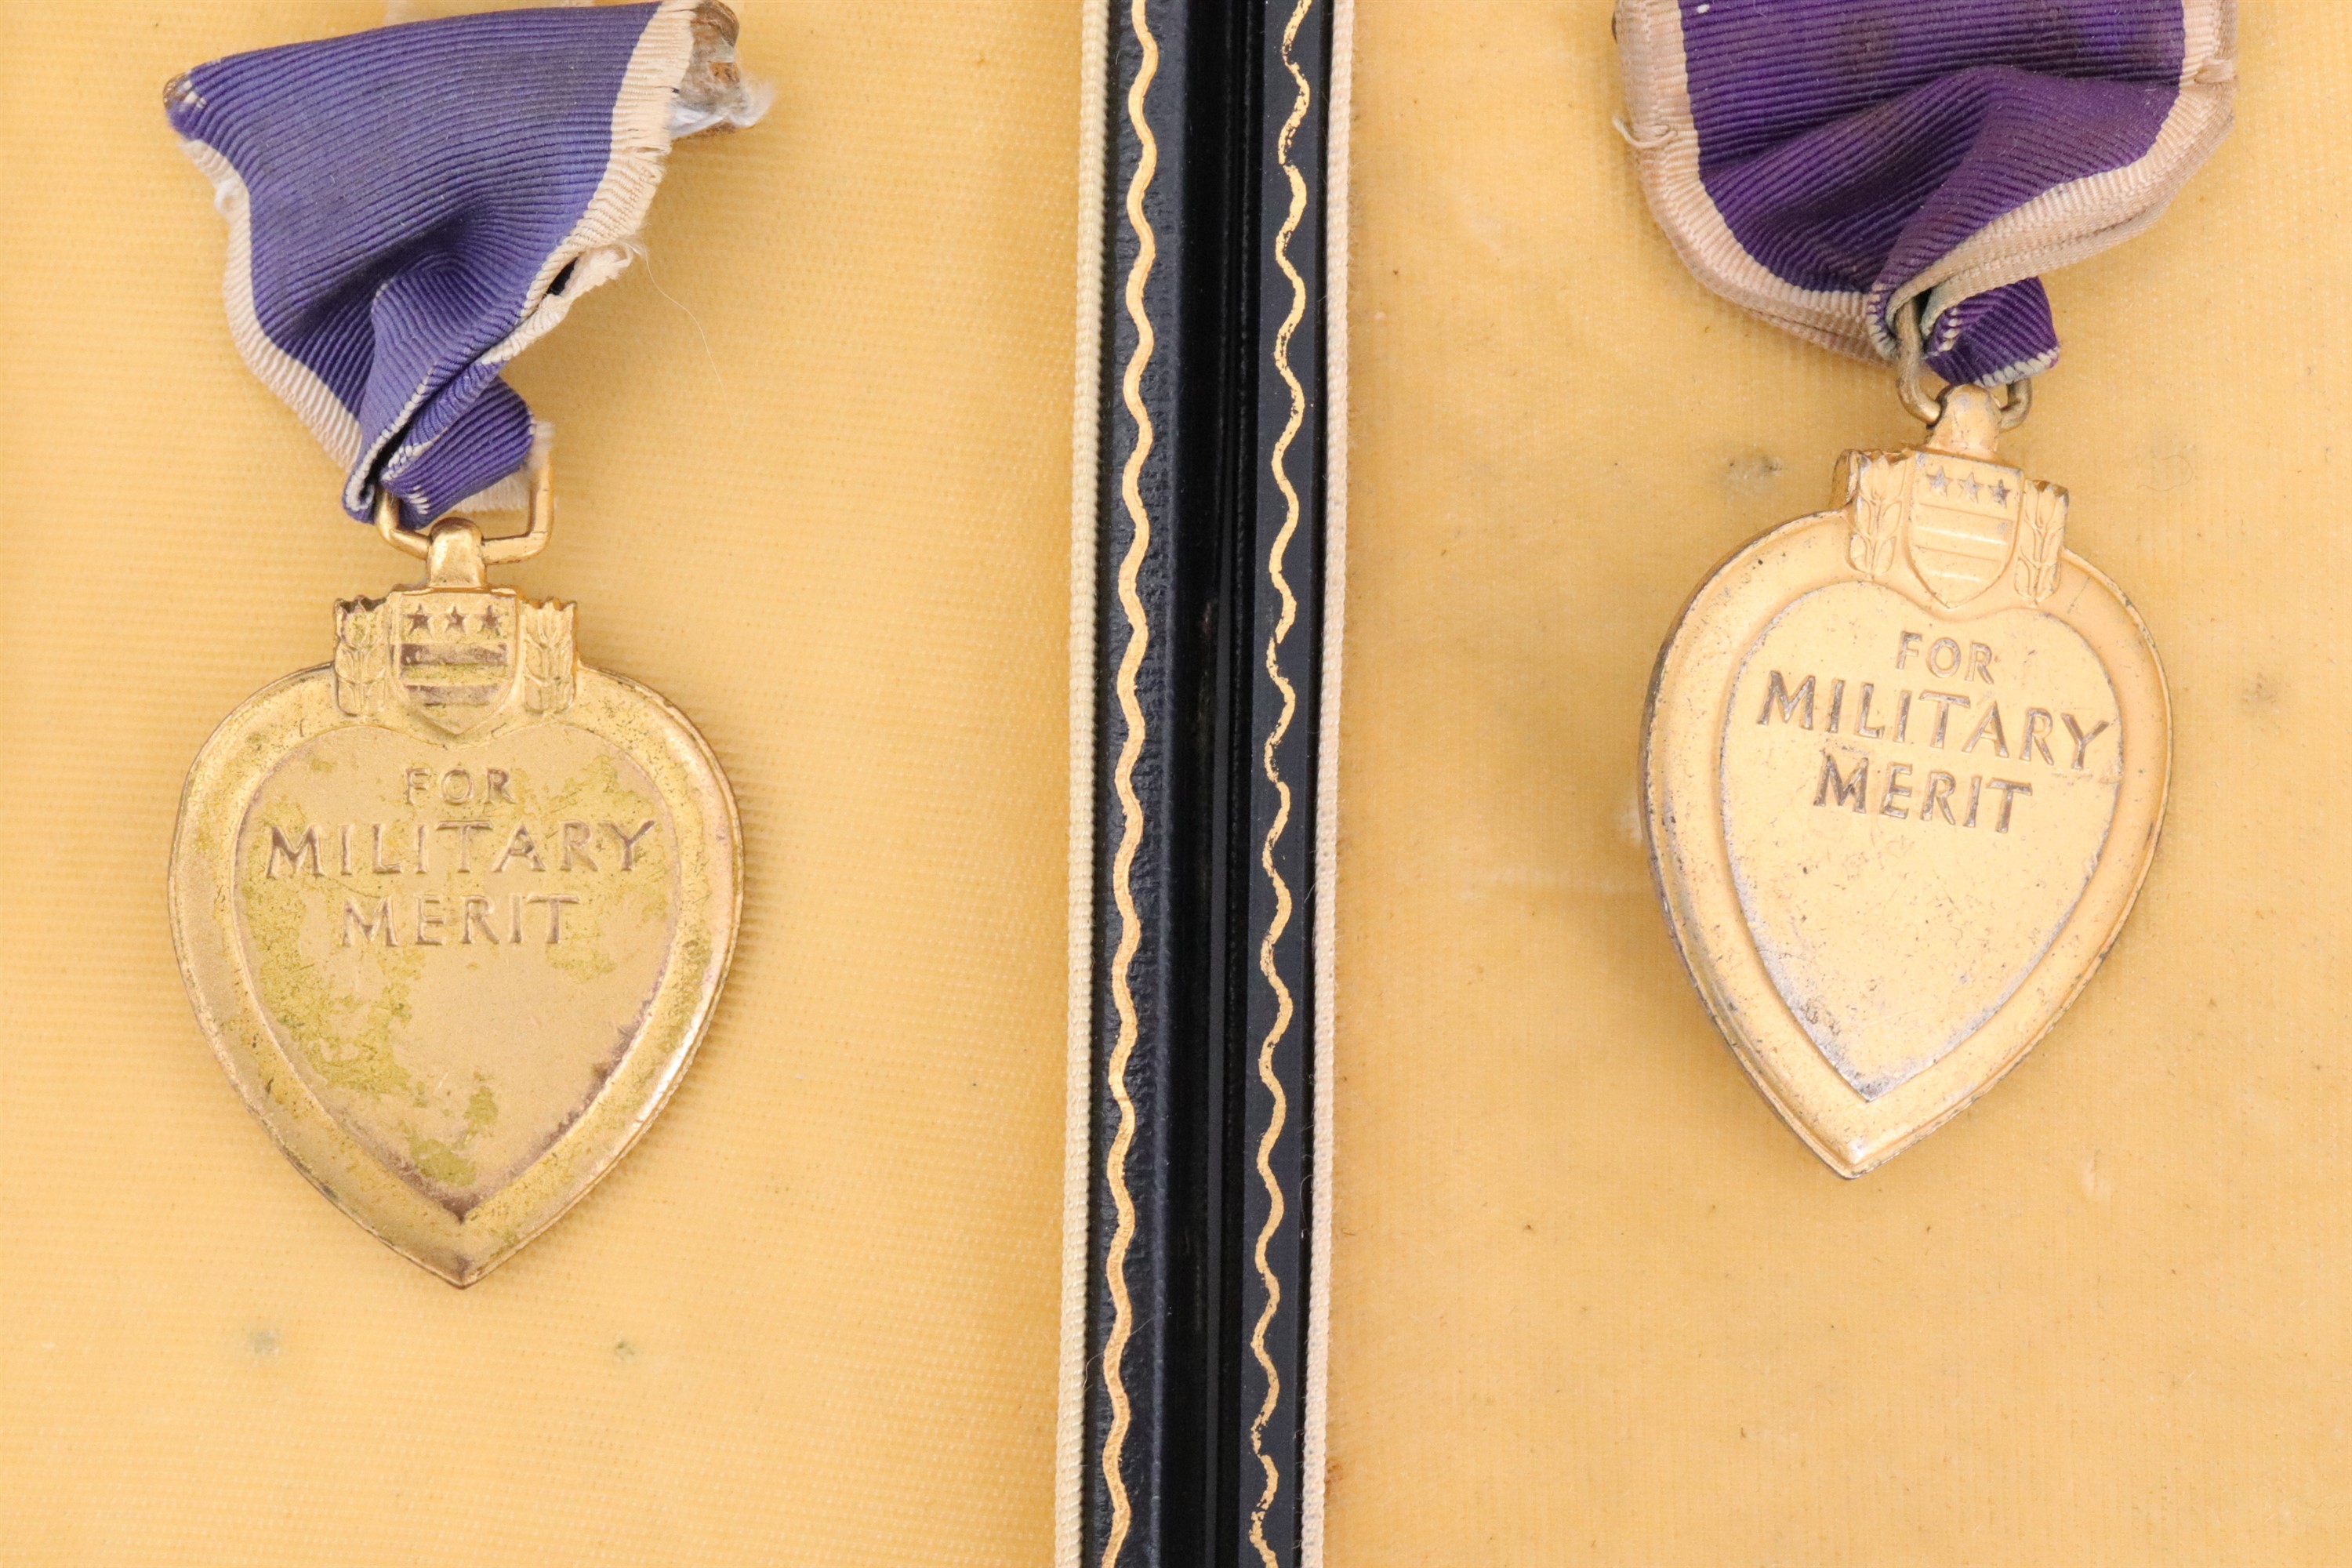 Two US Purple Heart medals, cased - Image 3 of 4